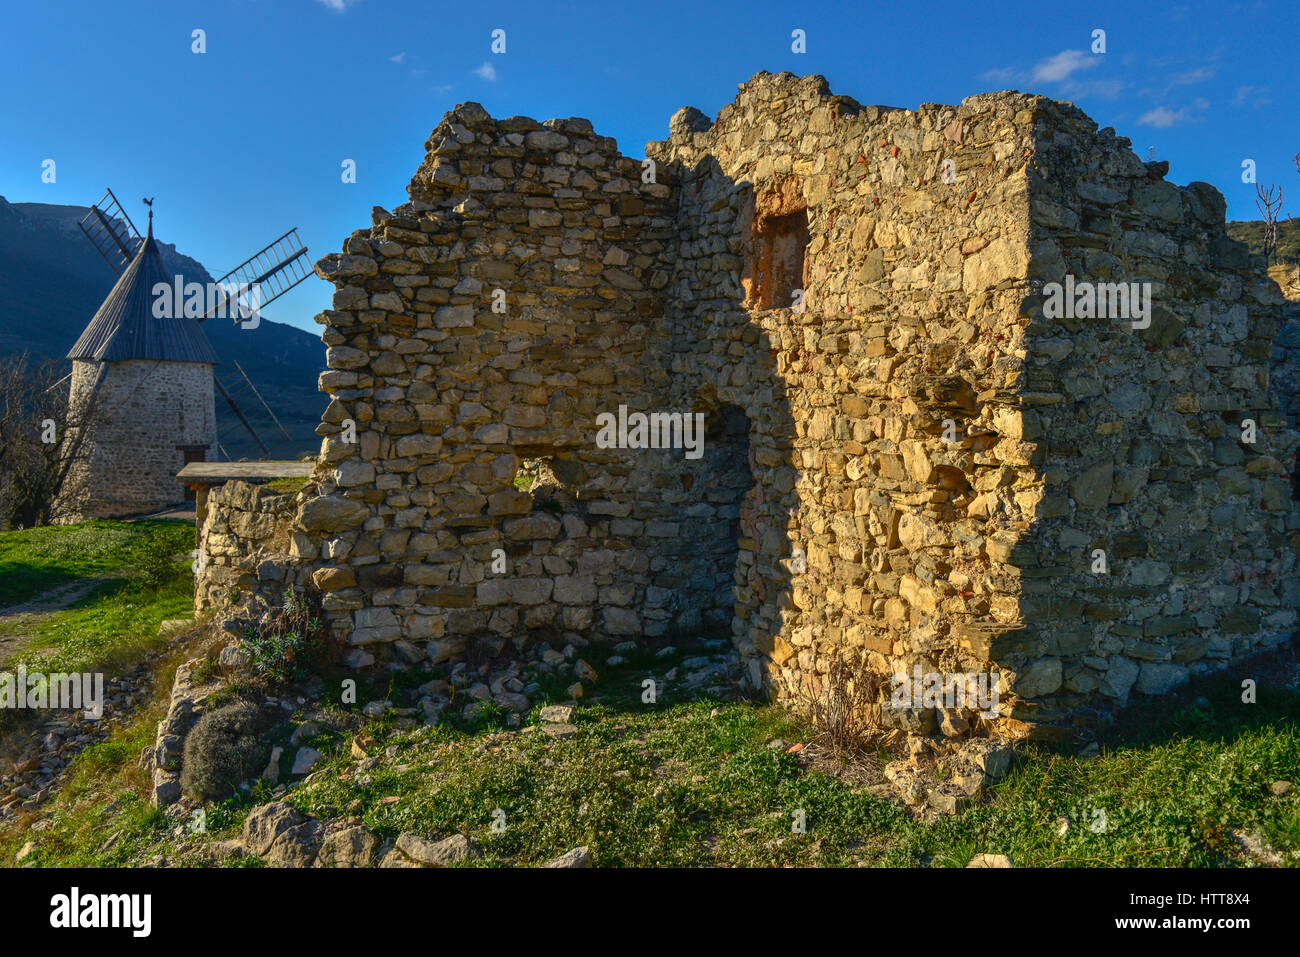 Ruined stone building and windmill at Cucugnan, in the Occitanie region of Southern France. Stock Photo